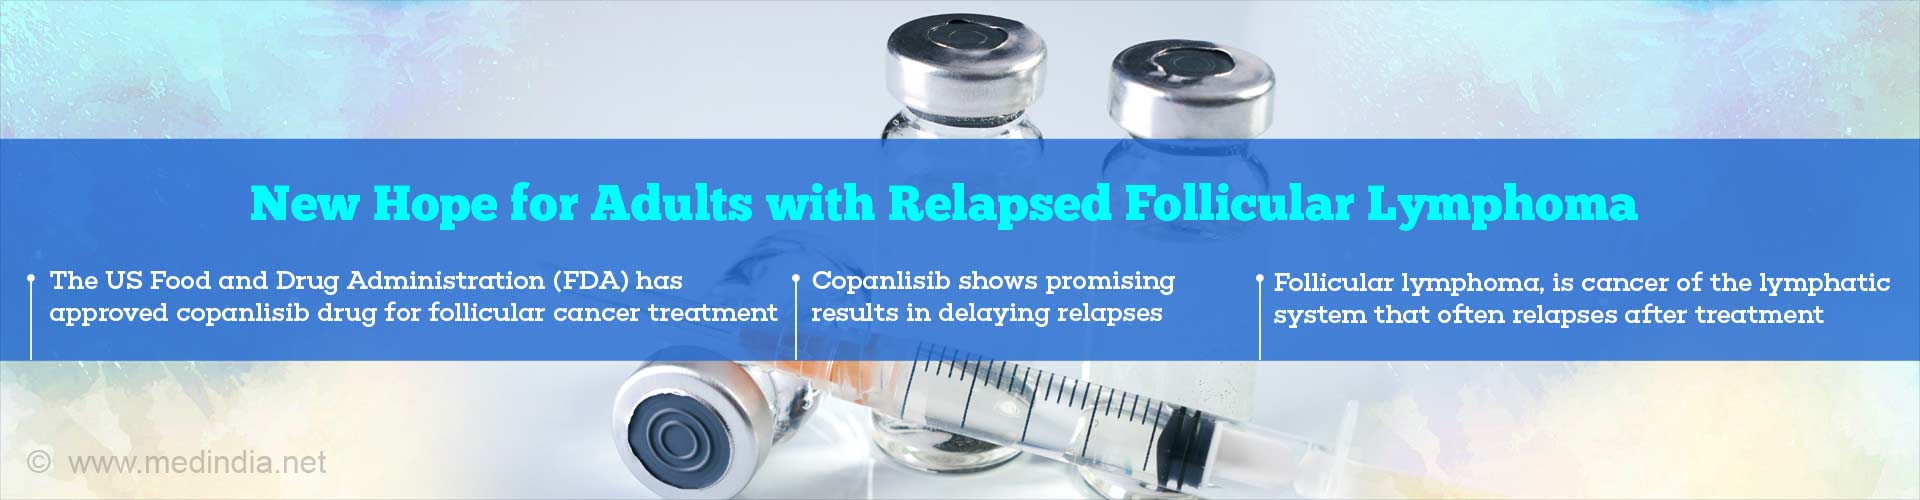 New hope for adults with relapsed follicular lymphoma
- The US Food and Drug Administration (FDA) has approved copanlisib drug for follicular cancer treatment
- Copanlisib  shows promising results in delaying relapses
- Follicular lymphoma, is a cancer of the lymphatic system that often relapses after treatment 